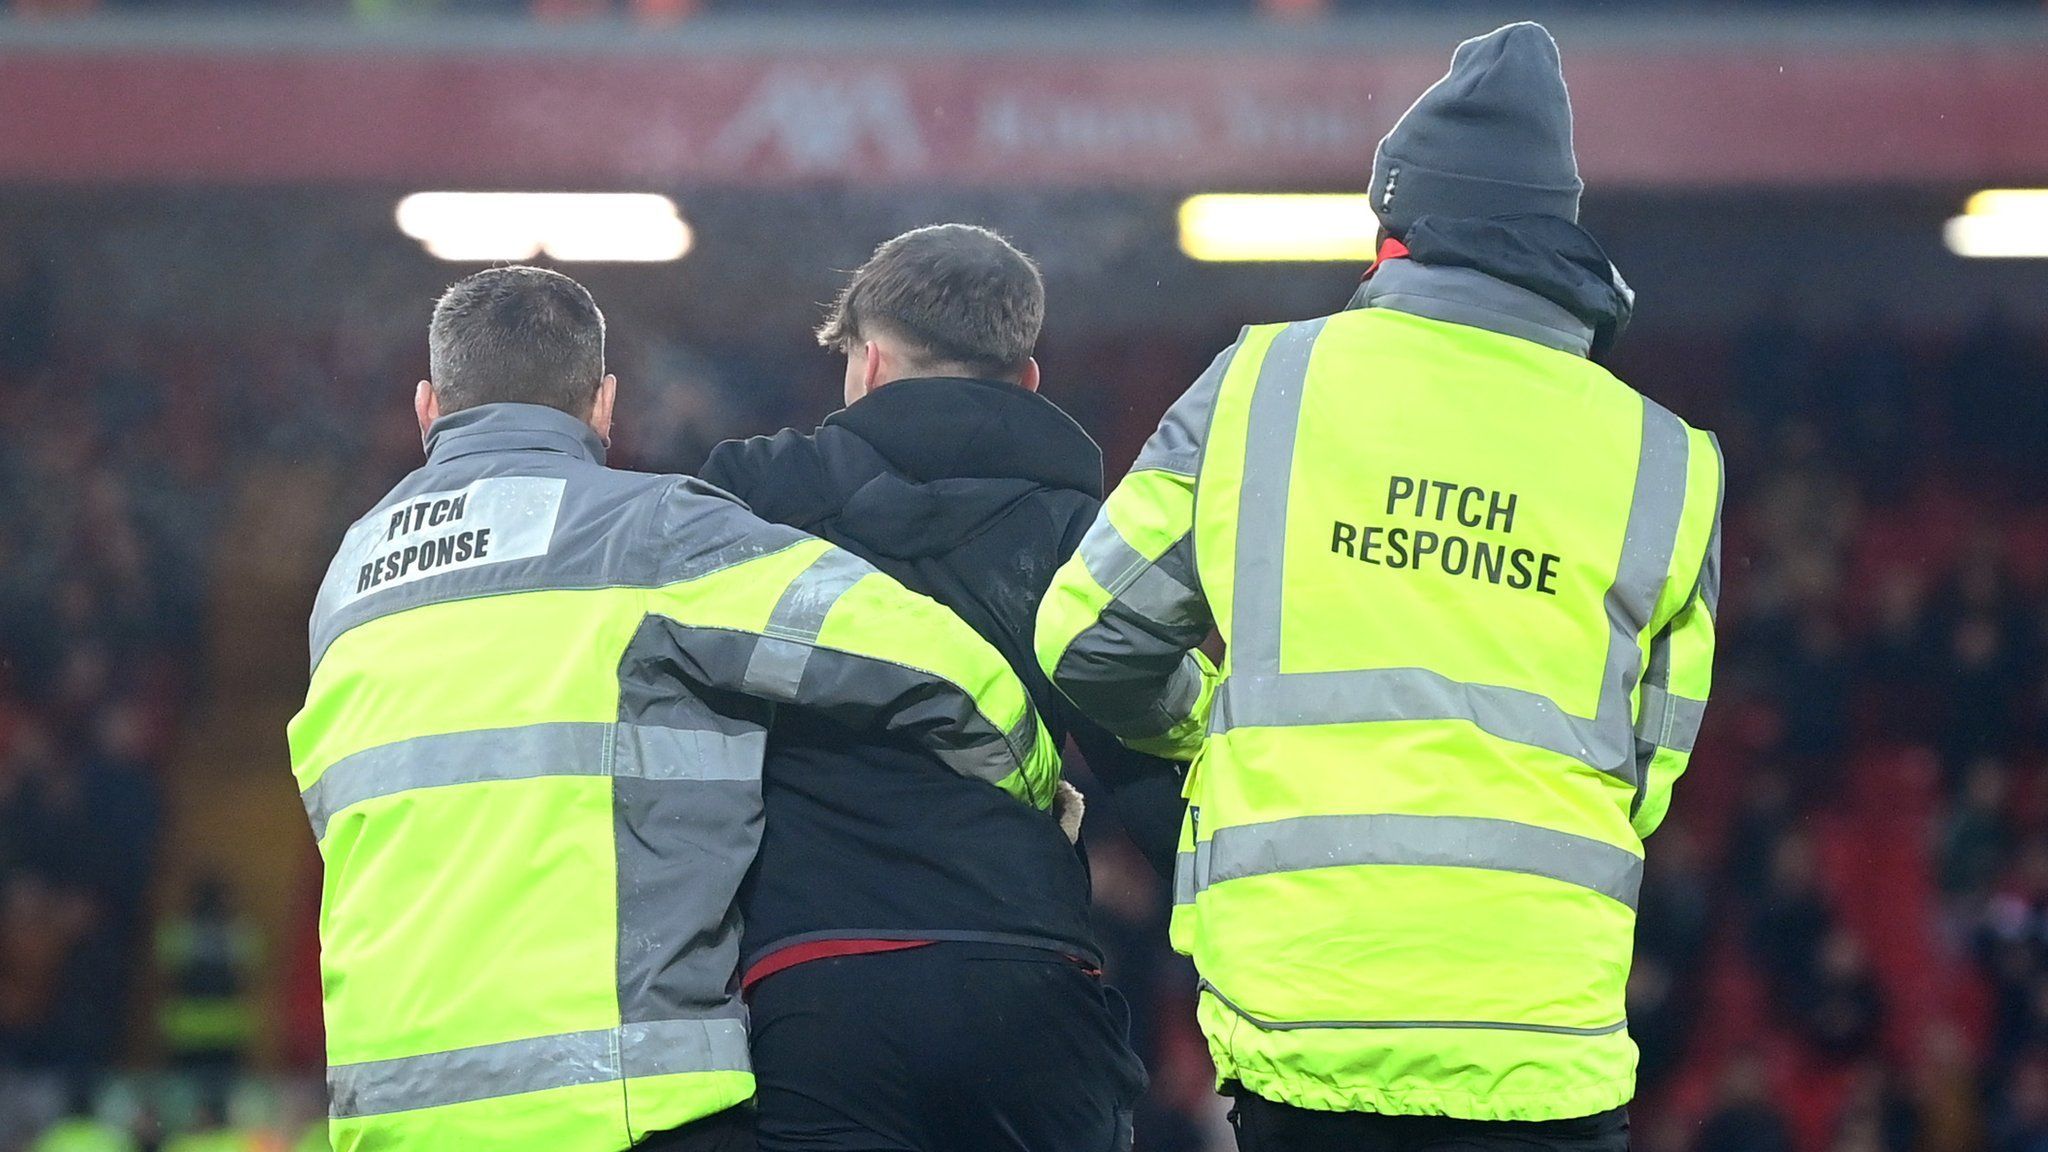 Two stewards tackling a pitch invader during a Premier League game